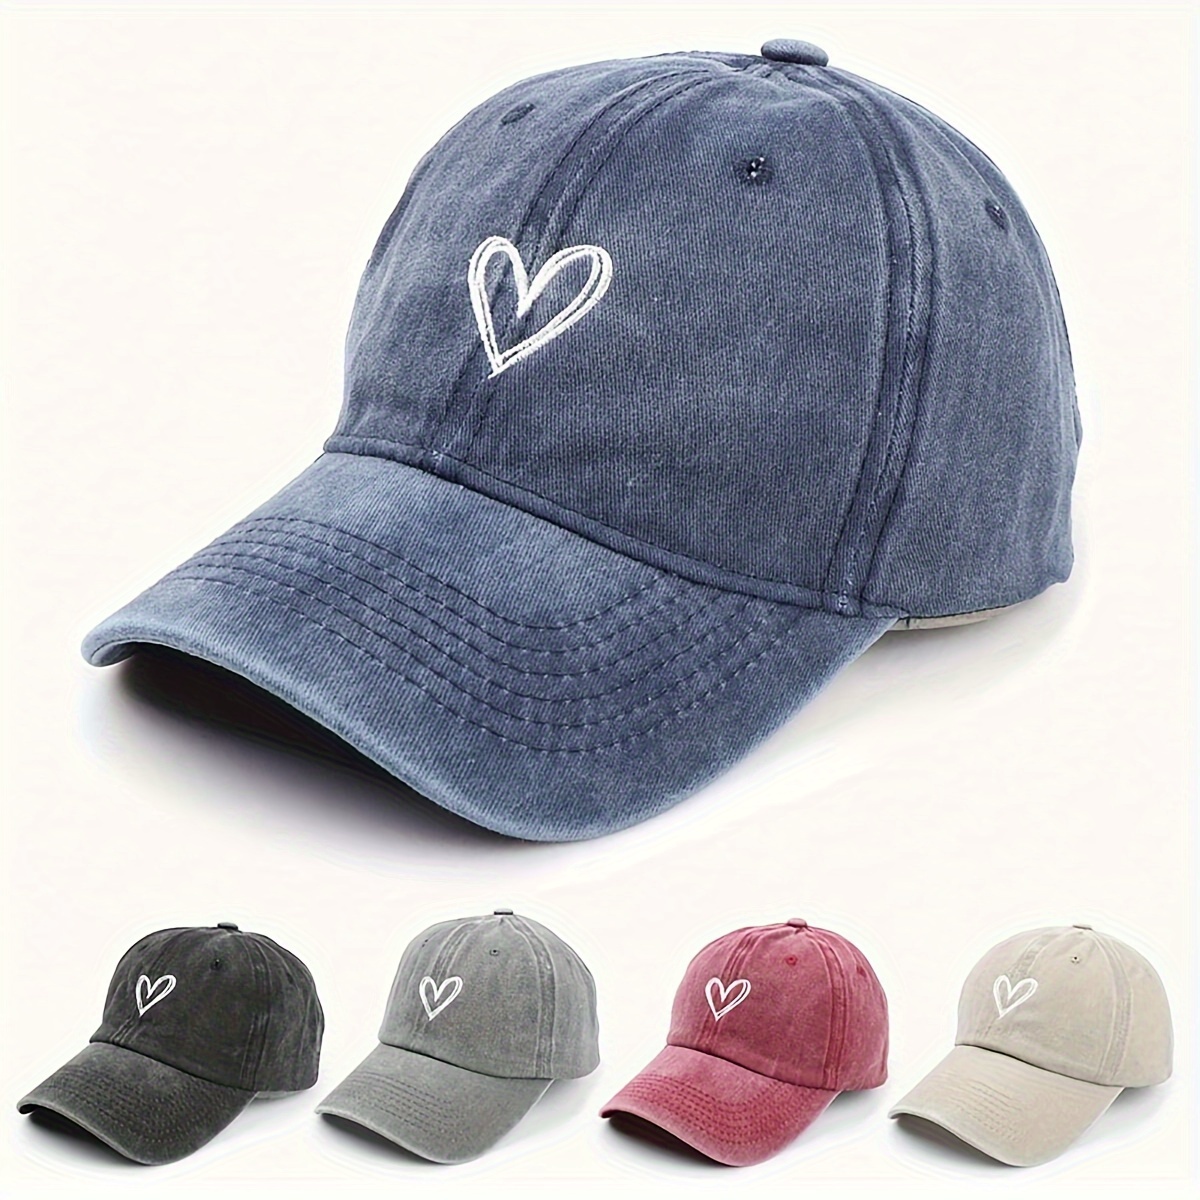 

Love Heart Embroidery Baseball Cap Vintage Washed Distressed Solid Color Sports Hat Breathable Adjustable Dad Hats Valentine's Day Gift